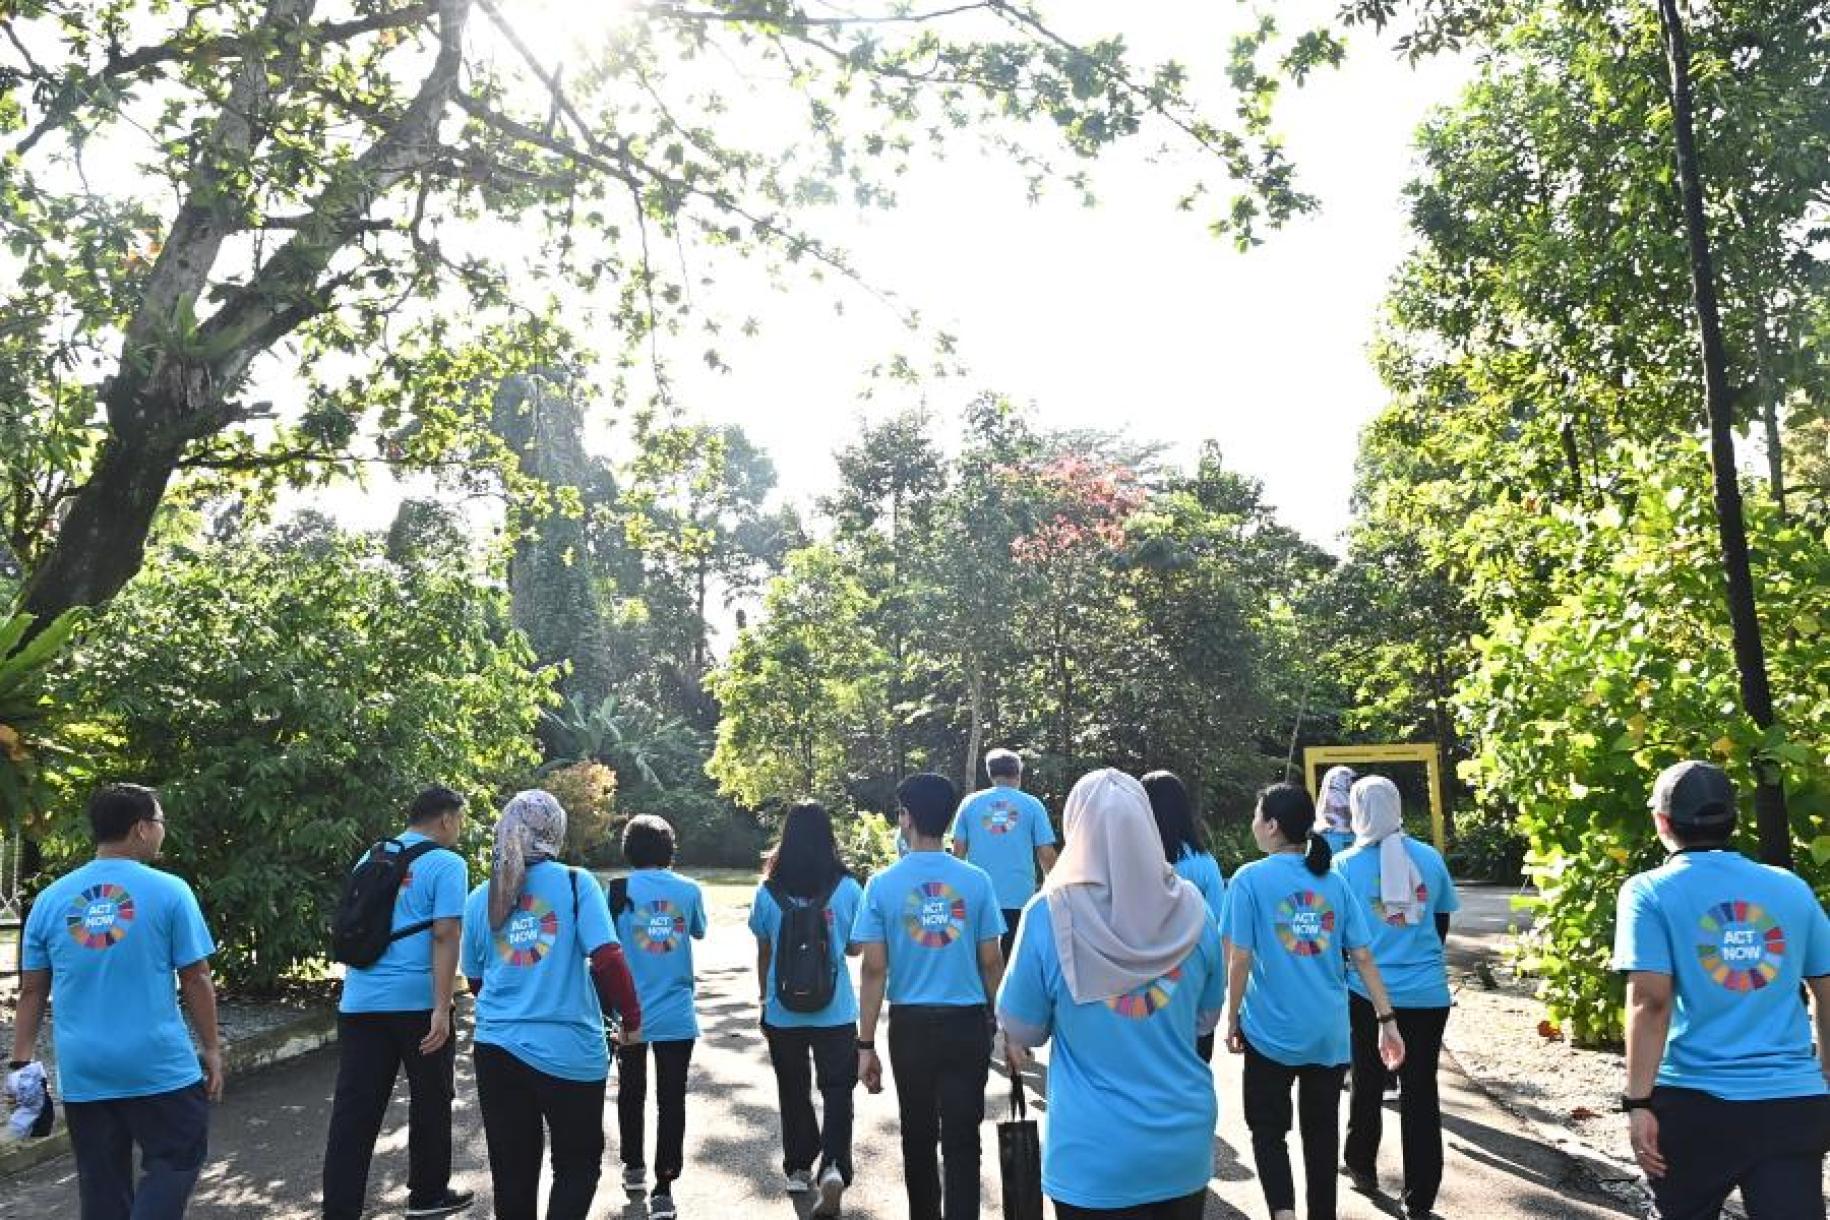 group of people in blue t-shirts walking with their backs turned towards trees